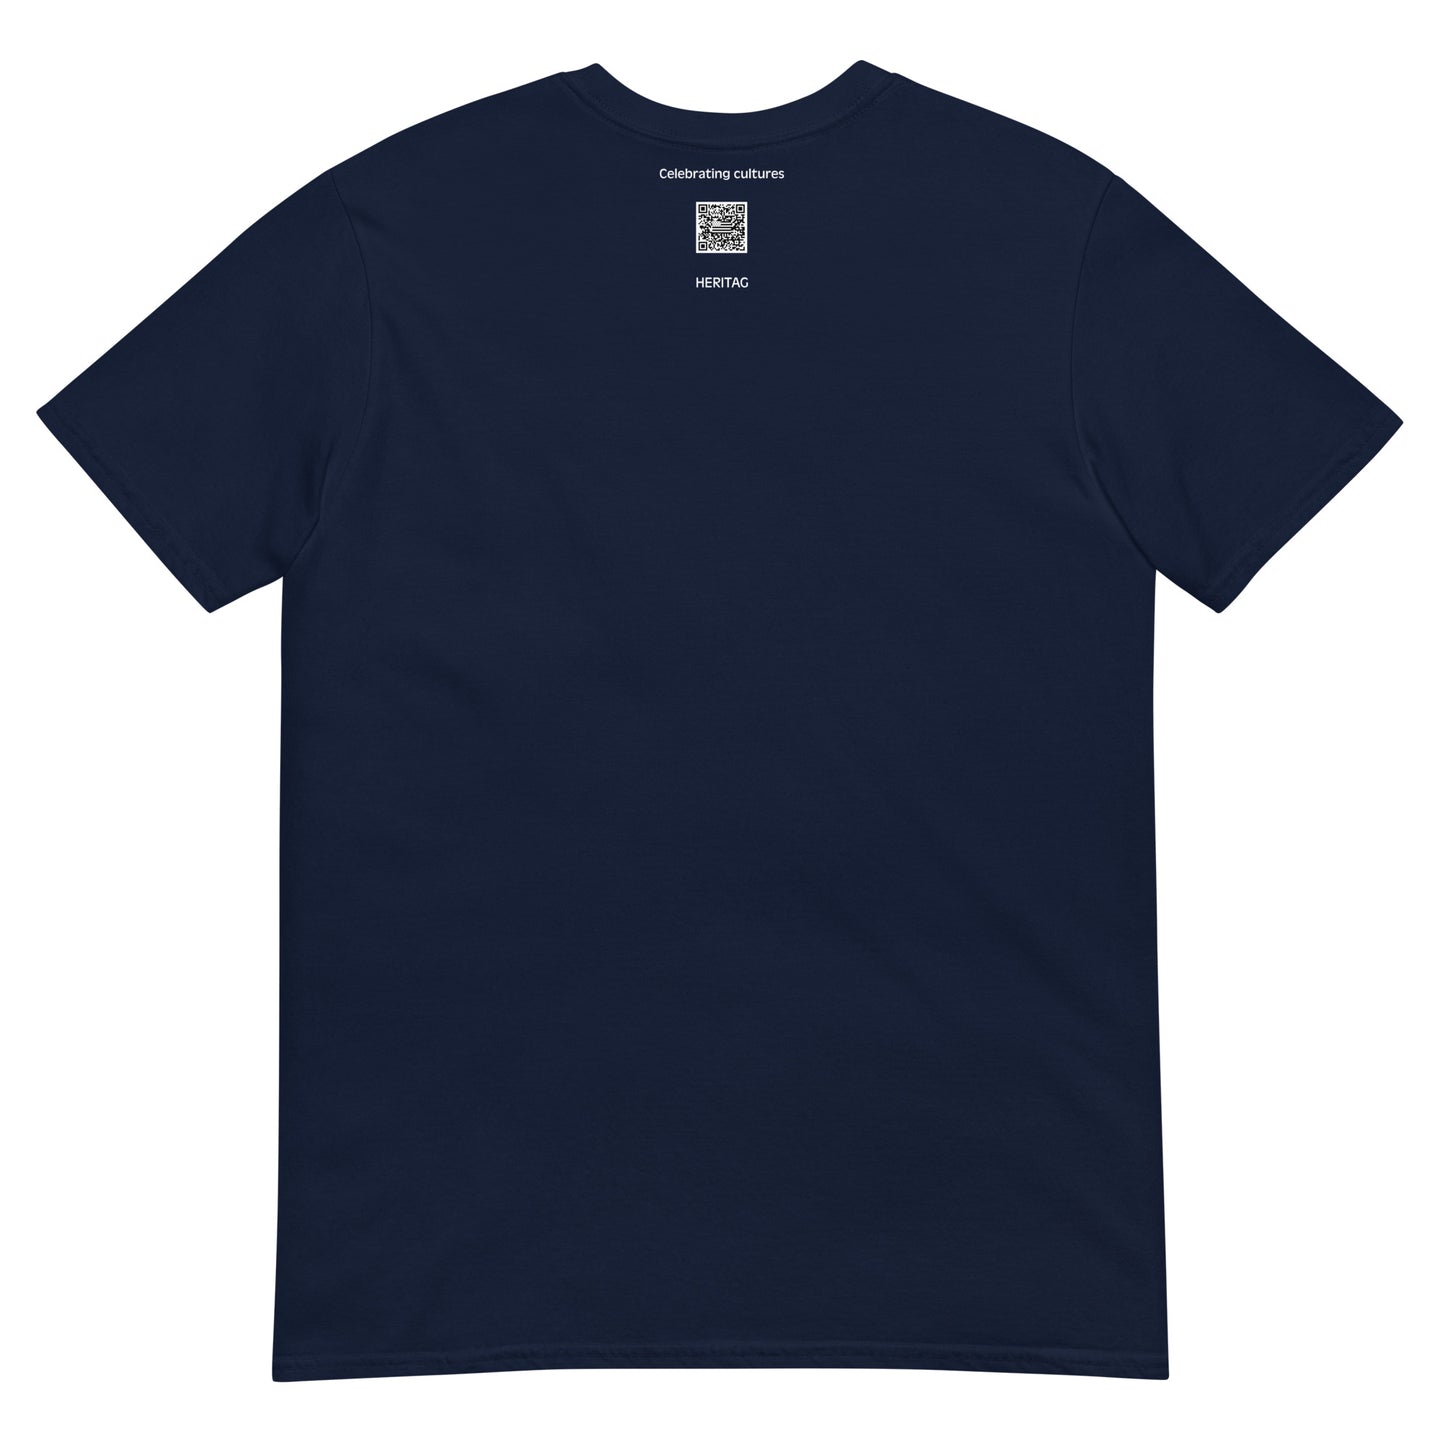 France - Bretons | Ethnic French Flag Interactive T-shirt